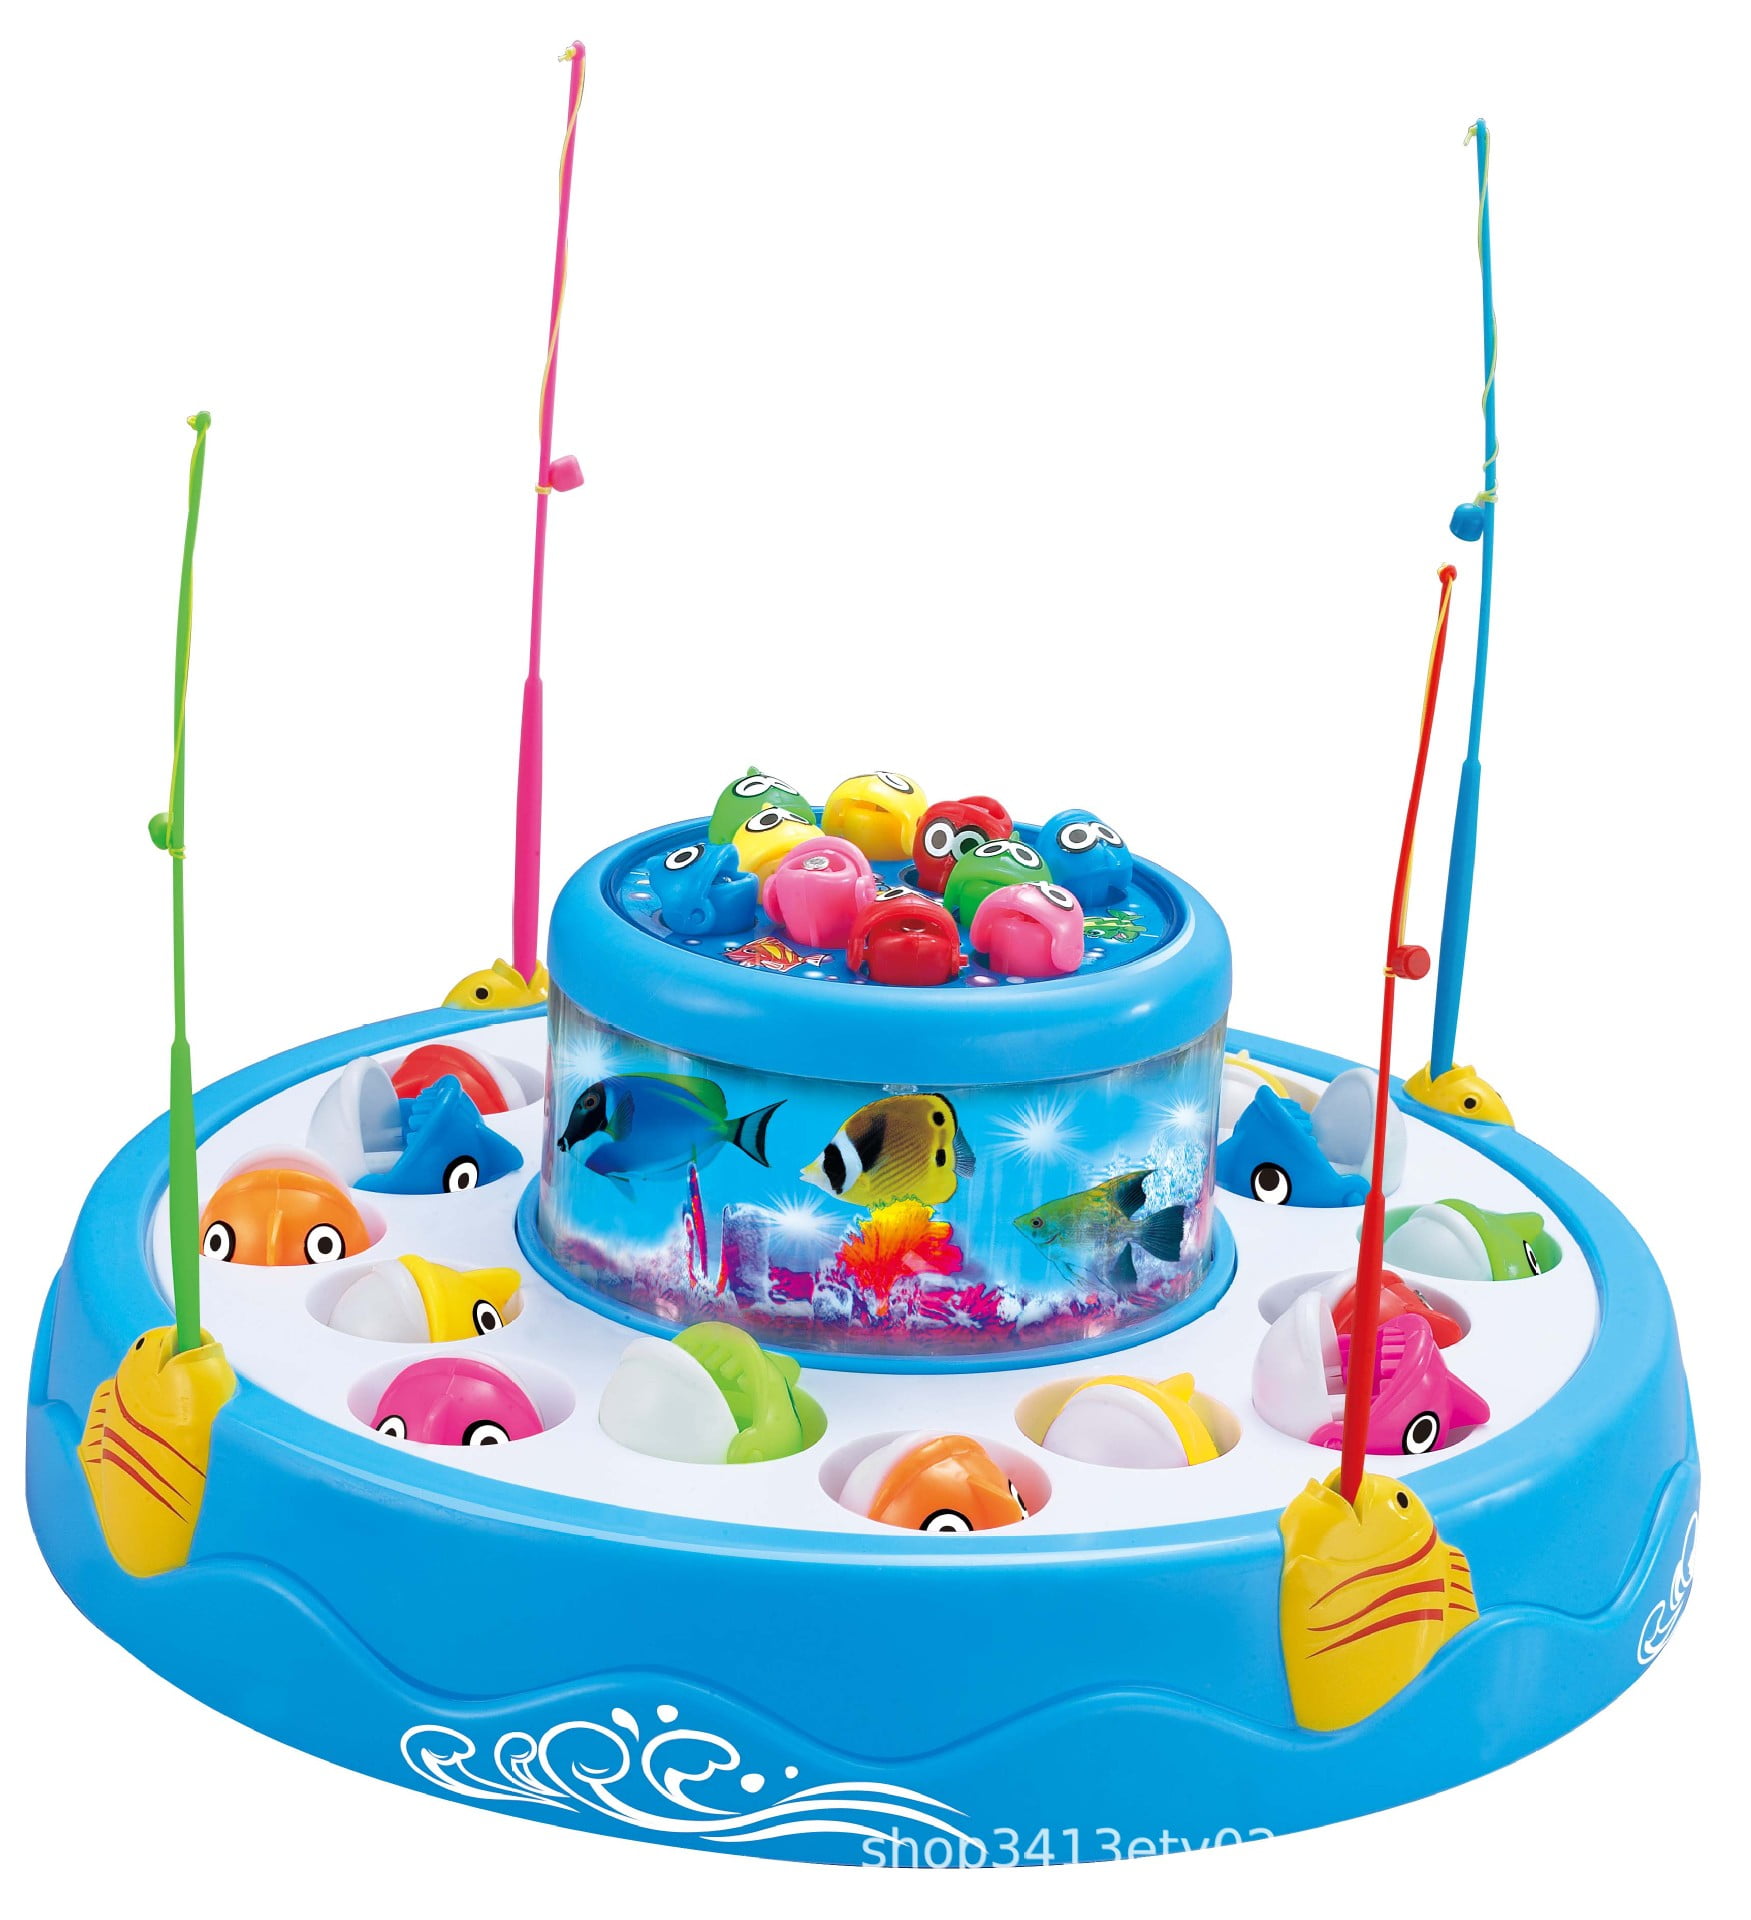 Buy IndusBay® Fishing Game Electronic Multi Functional Musical Fishing Toy  with 3D Light Music Keyboard, Water Slide Fun Toy for Kids Toddler Boys  Girls Online at Low Prices in India 